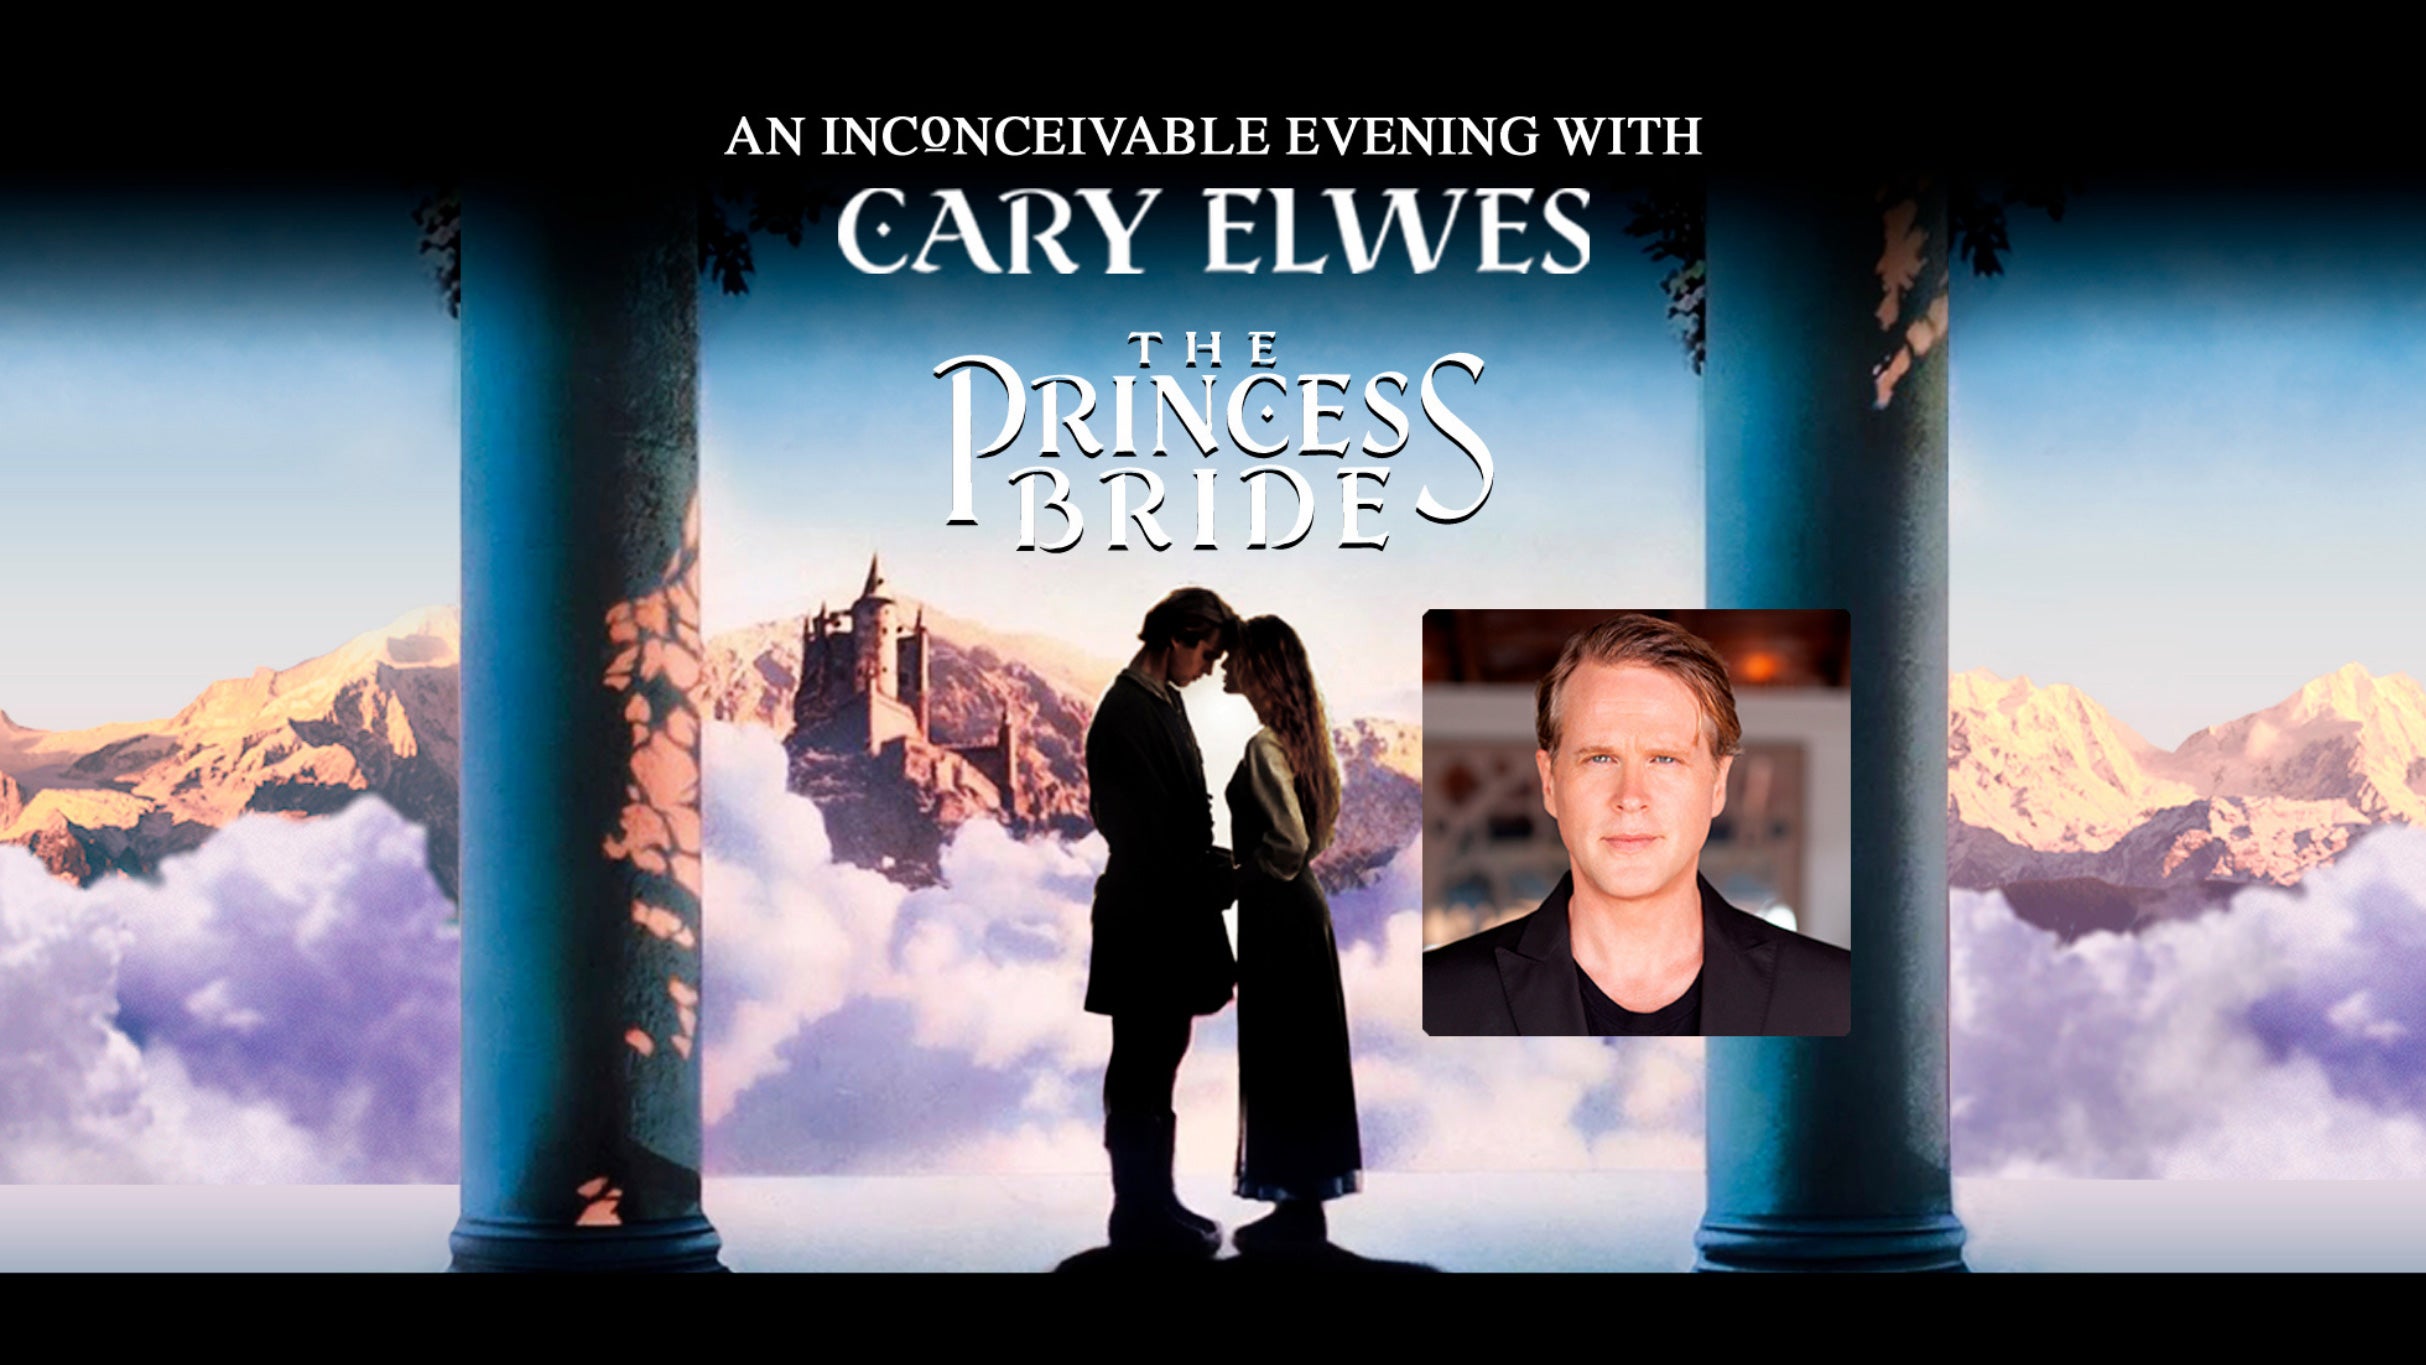 The Princess Bride: An Inconceivable Evening with Cary Elwes presale code for performance tickets in Stamford, CT (Palace Theatre Stamford)